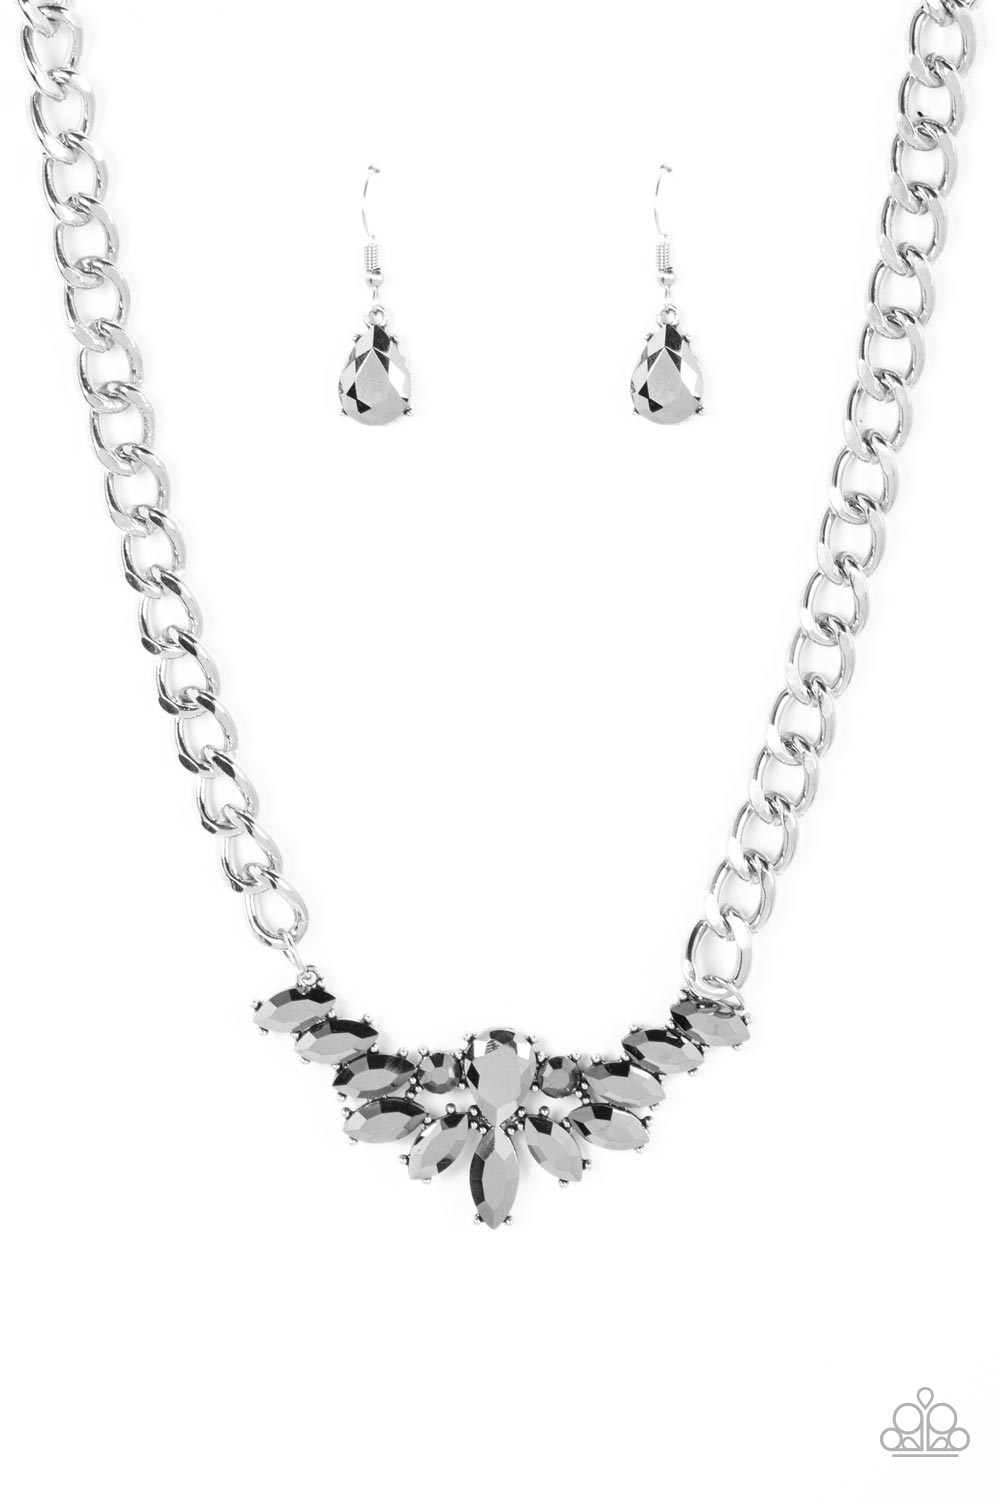 Paparazzi Come at Me - Silver Necklace - A Finishing Touch Jewelry